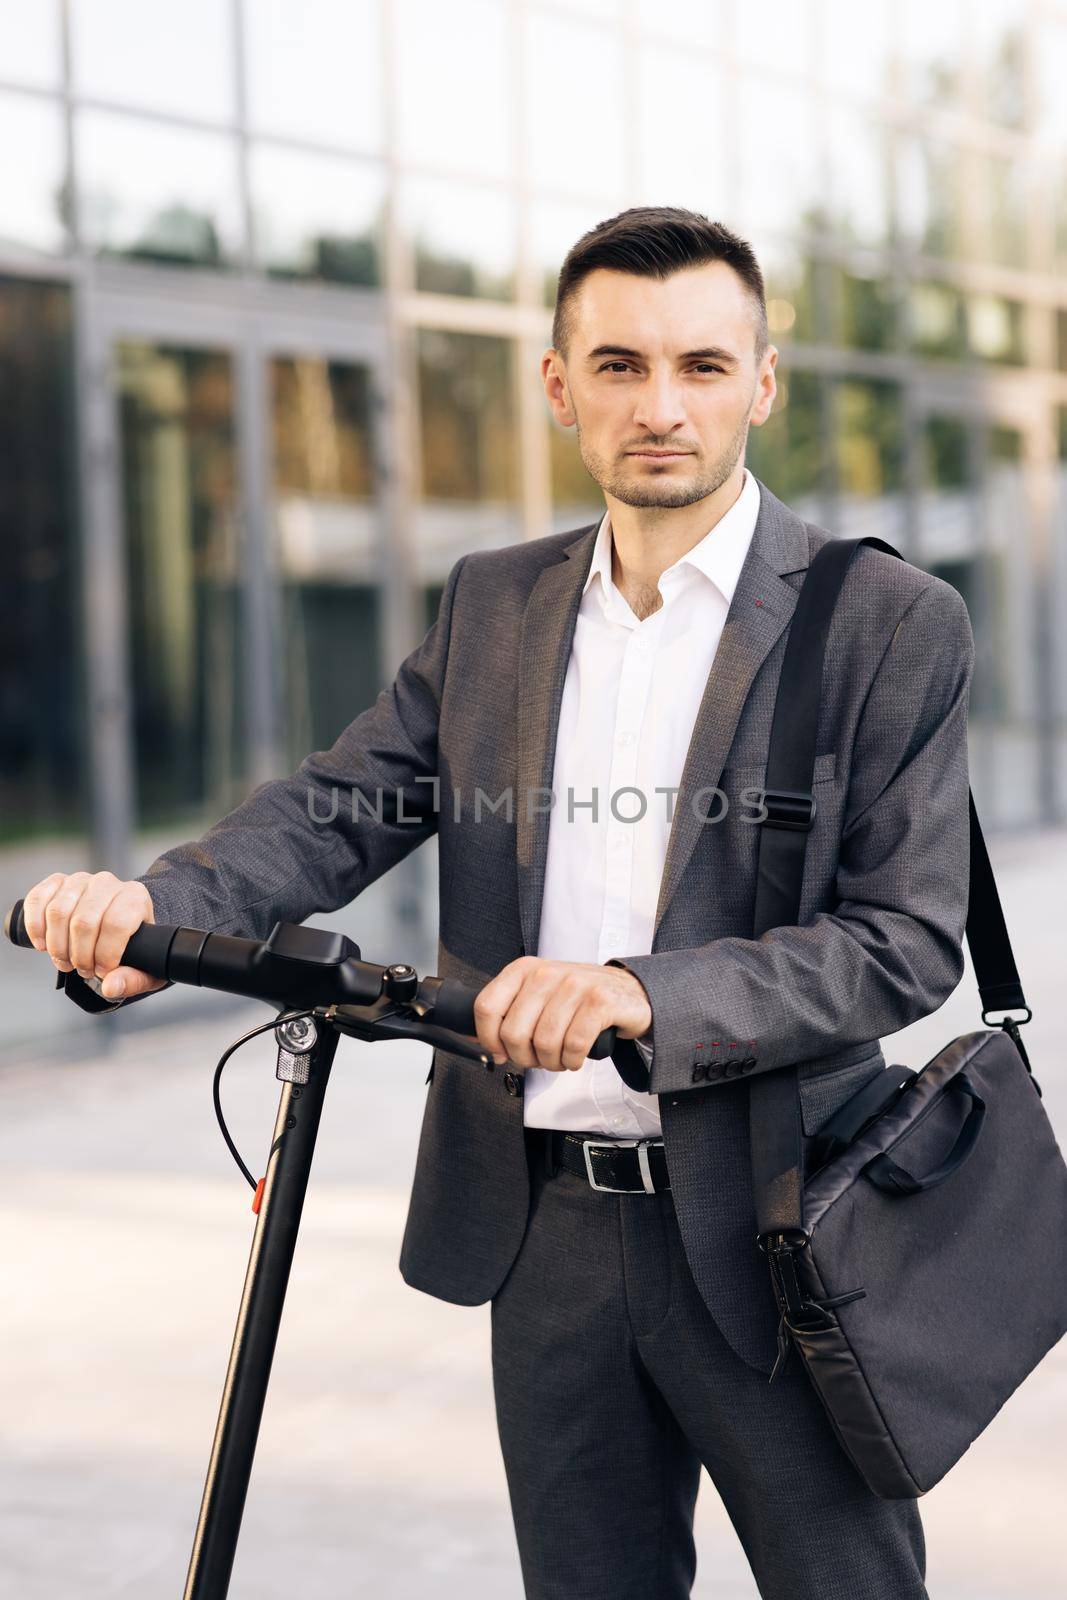 Modern urban alternative transport. Portrait of confident businessman standing with electric scooter and looking at camera. Stylysh man on vehicle outdoors. E-Scooter rider rent personal eco transport by uflypro